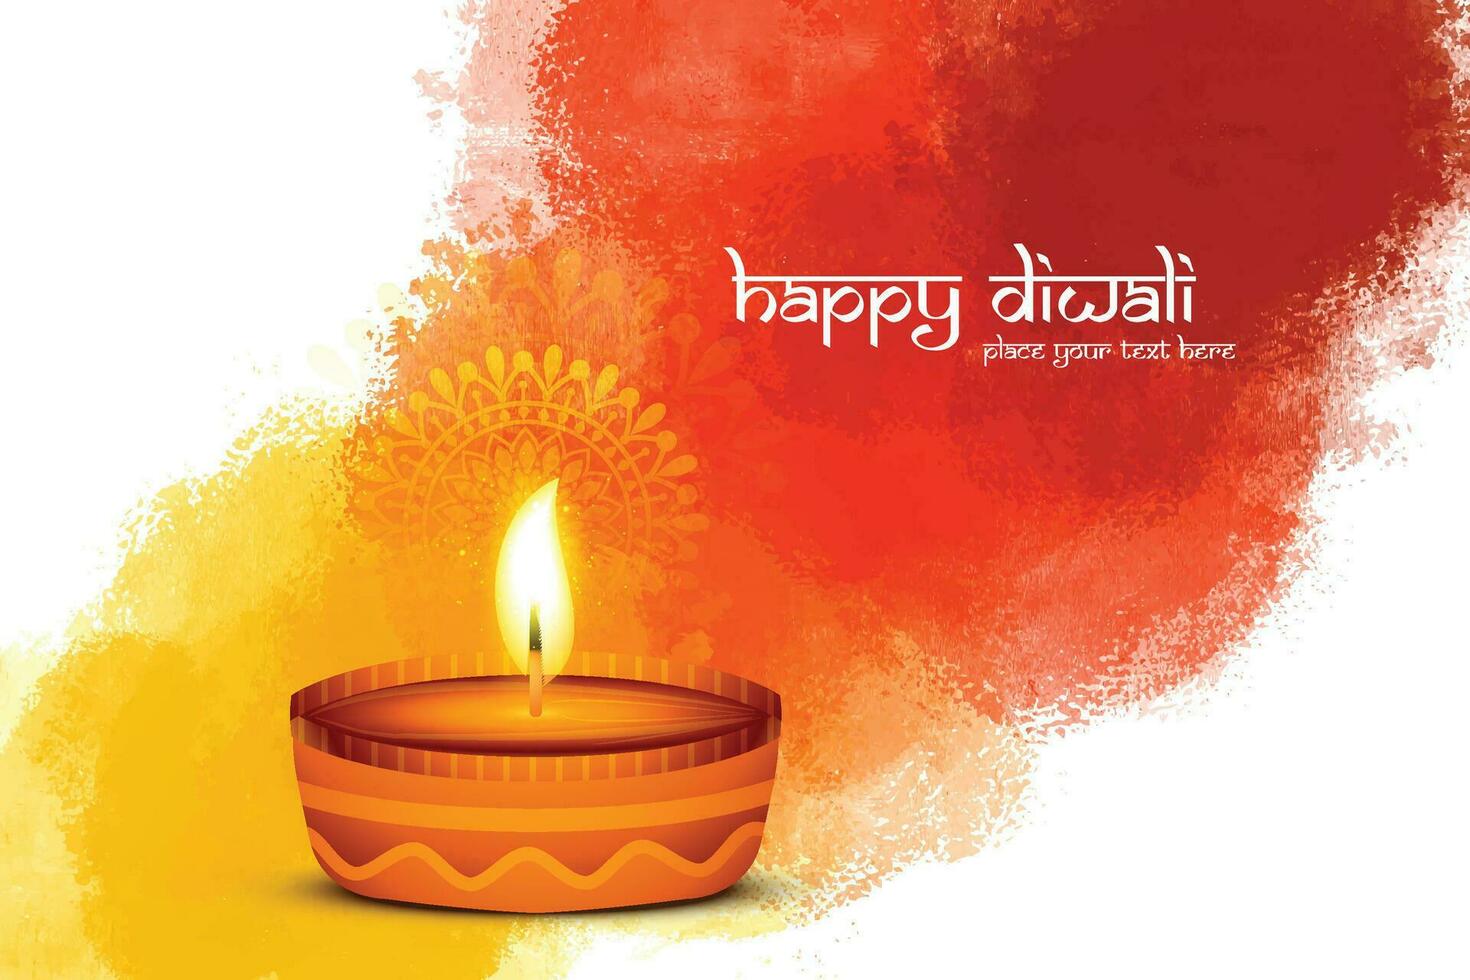 Happy diwali religious traditional festival card background vector